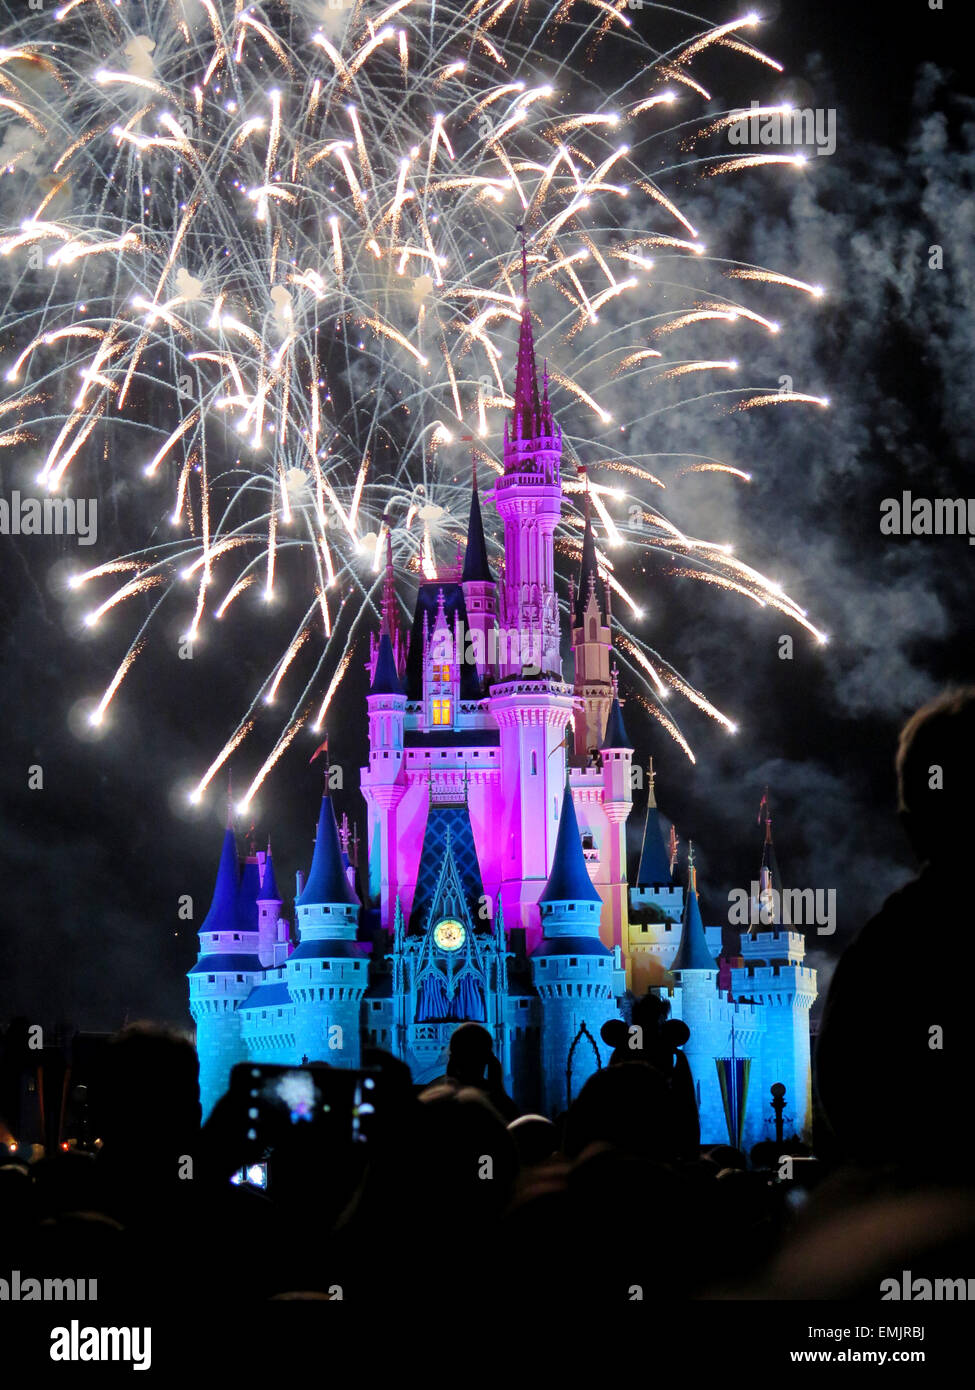 The famous Wishes nighttime spectacular fireworks at the Disney Magic Kingdom Castle in Orlando, Florida, on febrary 7, 2015 Stock Photo